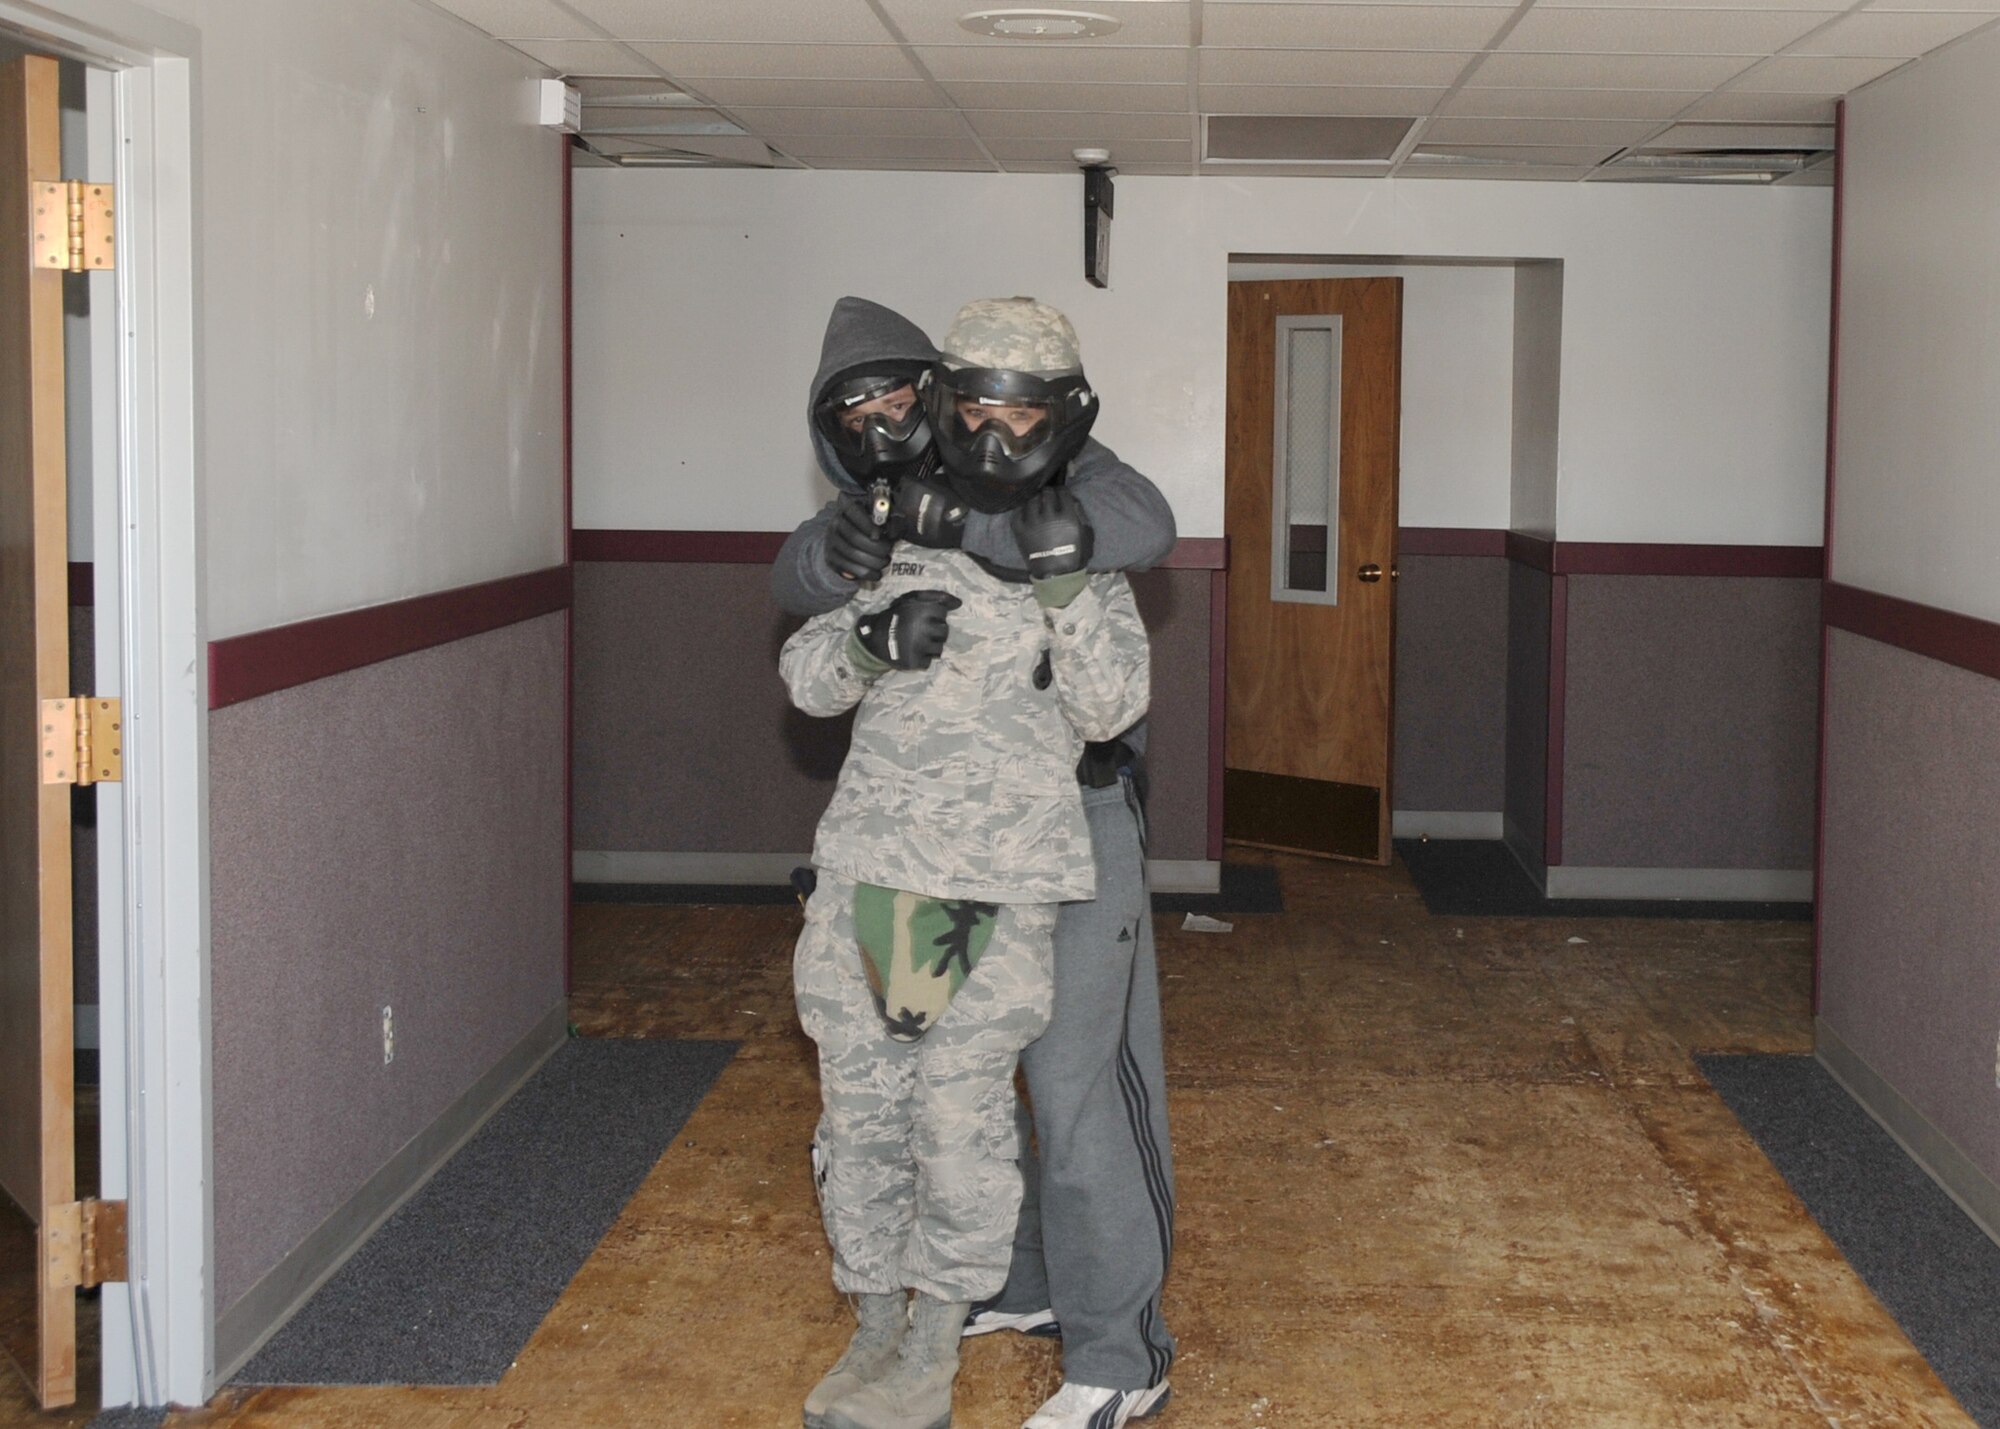 An Airman posing as a shooter holds a hostage during an active-shooter scenario.  U.S. Air Force Photo by Dennis Carlson.